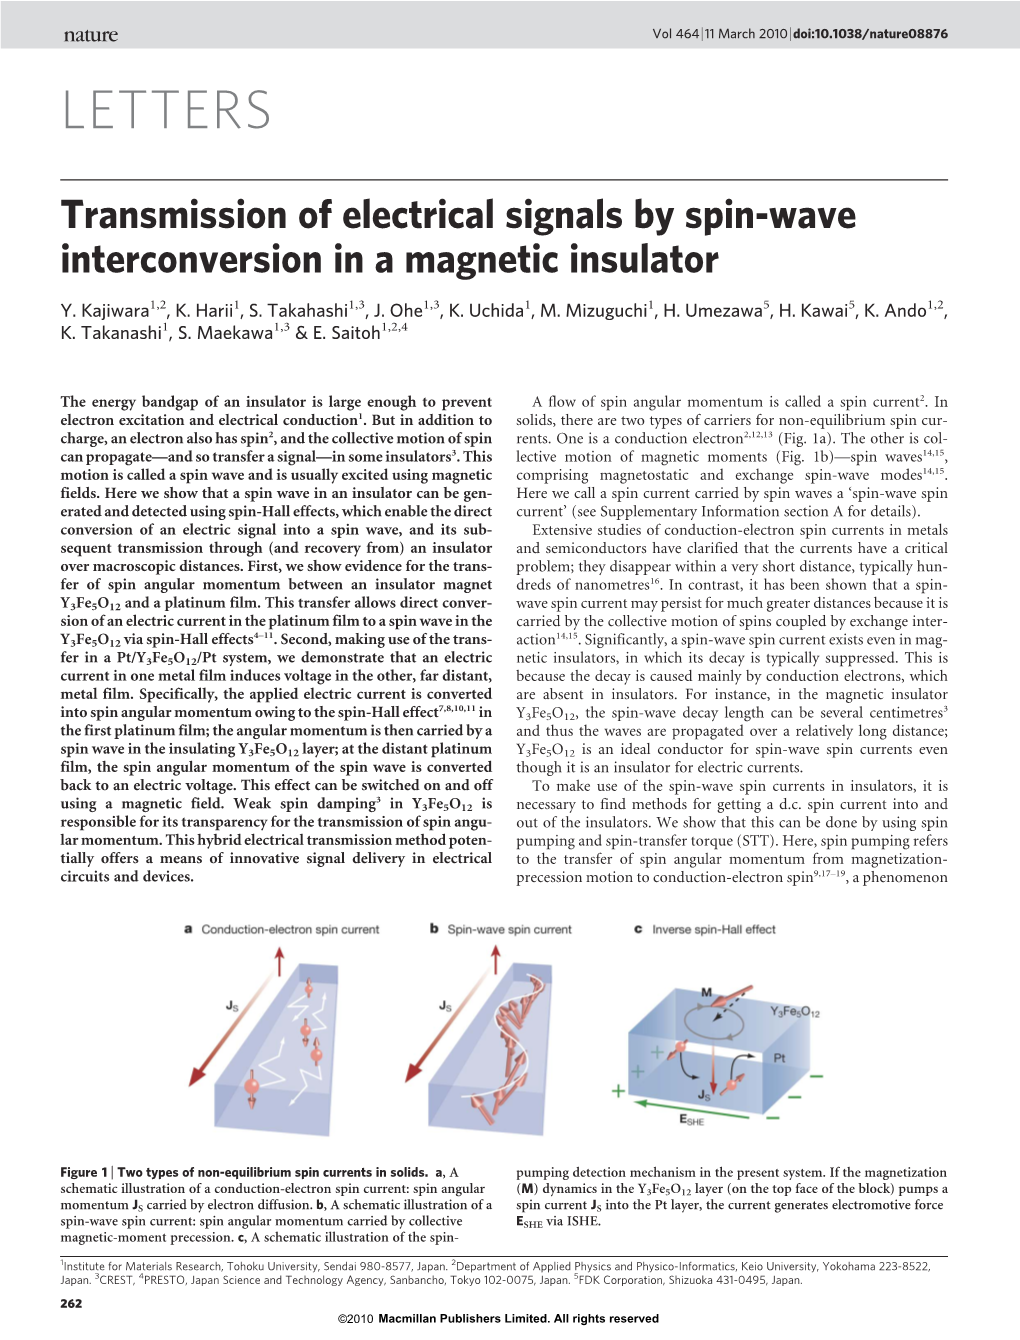 Transmission of Electrical Signals by Spin-Wave Interconversion in a Magnetic Insulator